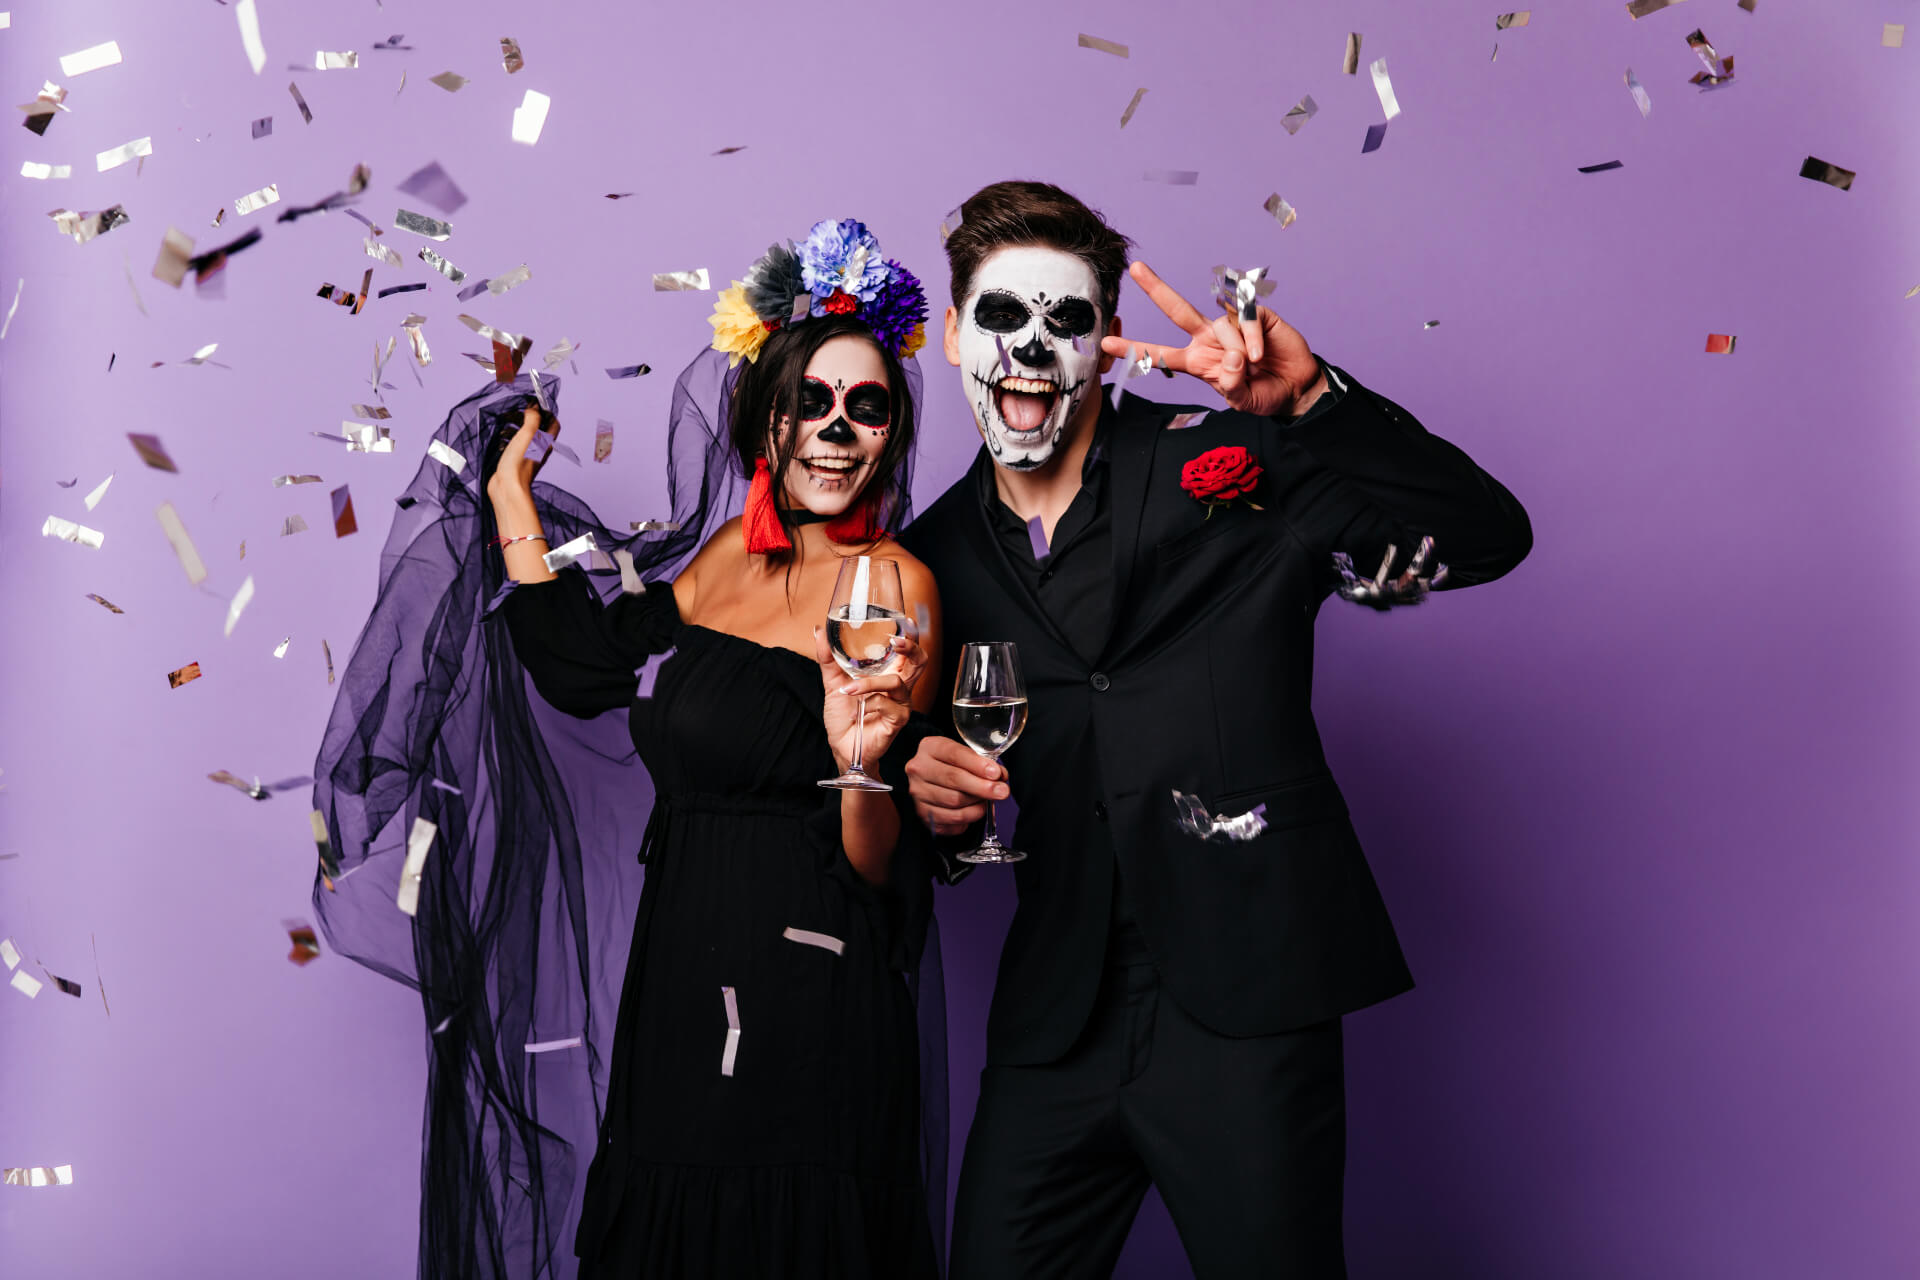 Celebrate Halloween in style with spooky costumes and an unforgettable party. Make the scary stories come to life and ensure a night full of fun and style.